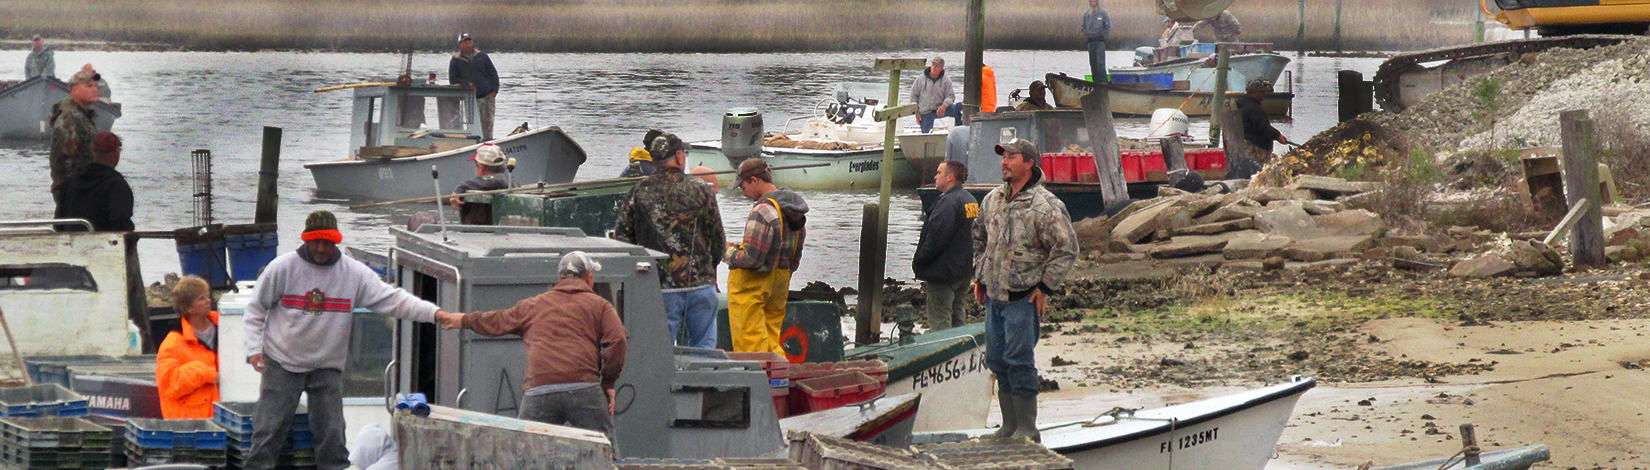 Oystermen in the bay oyster restoration